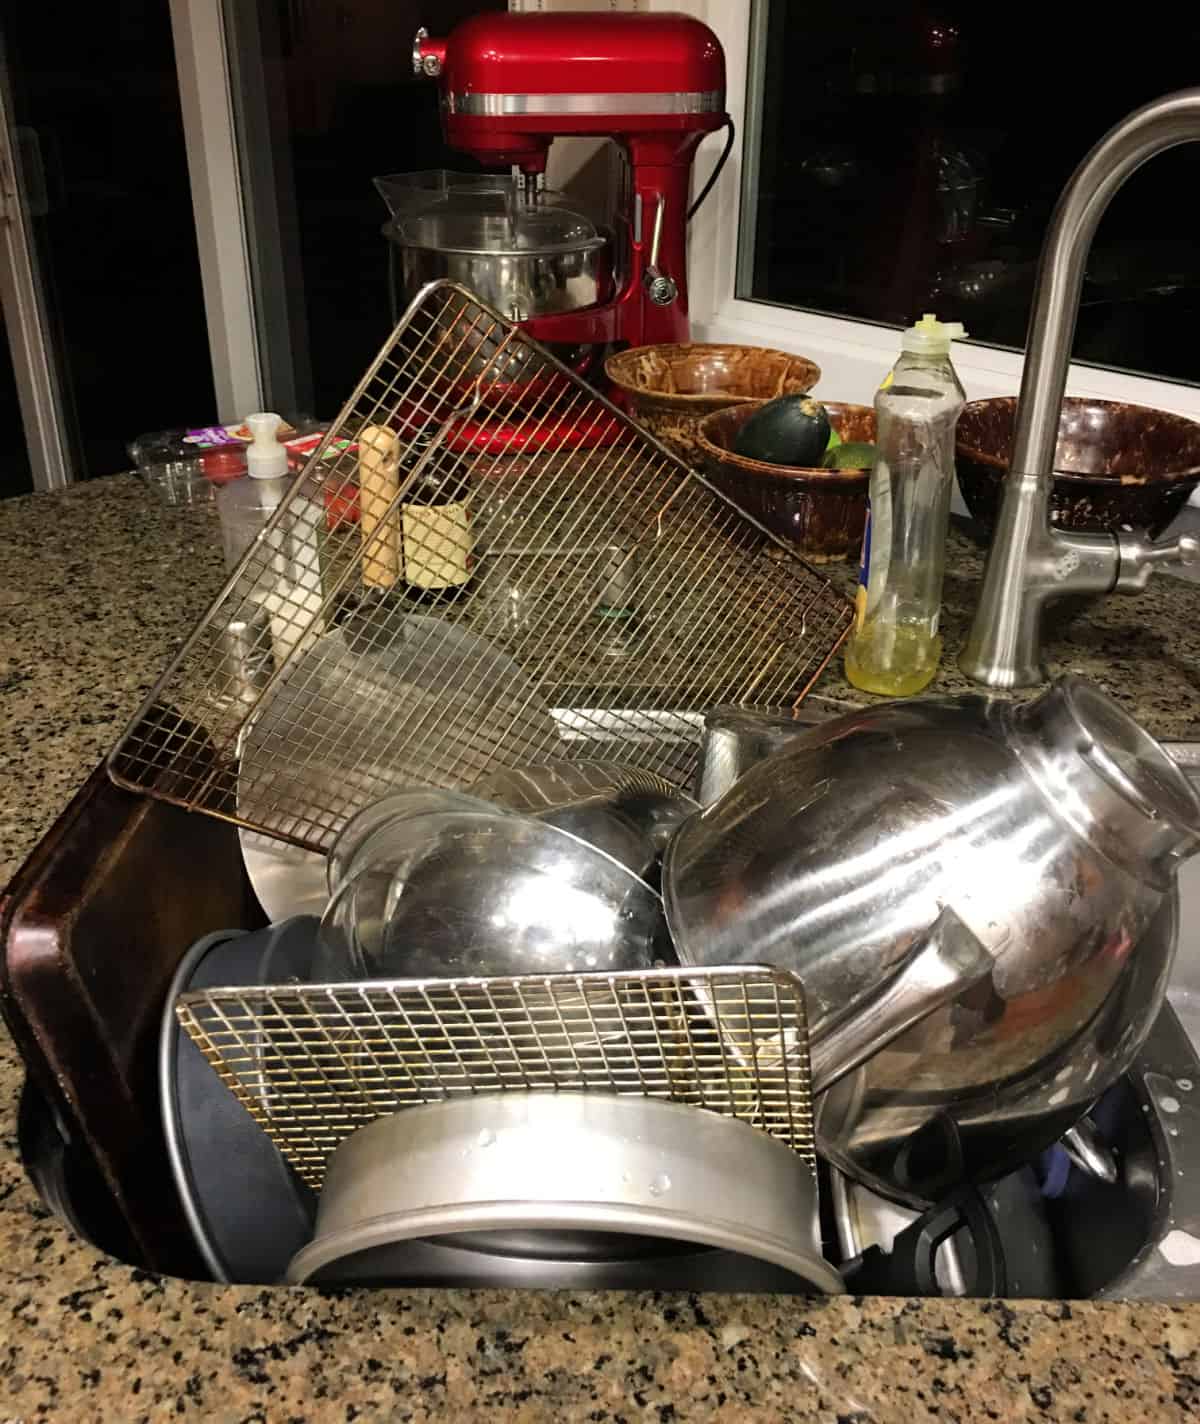 Sink full of cleaned dishes.